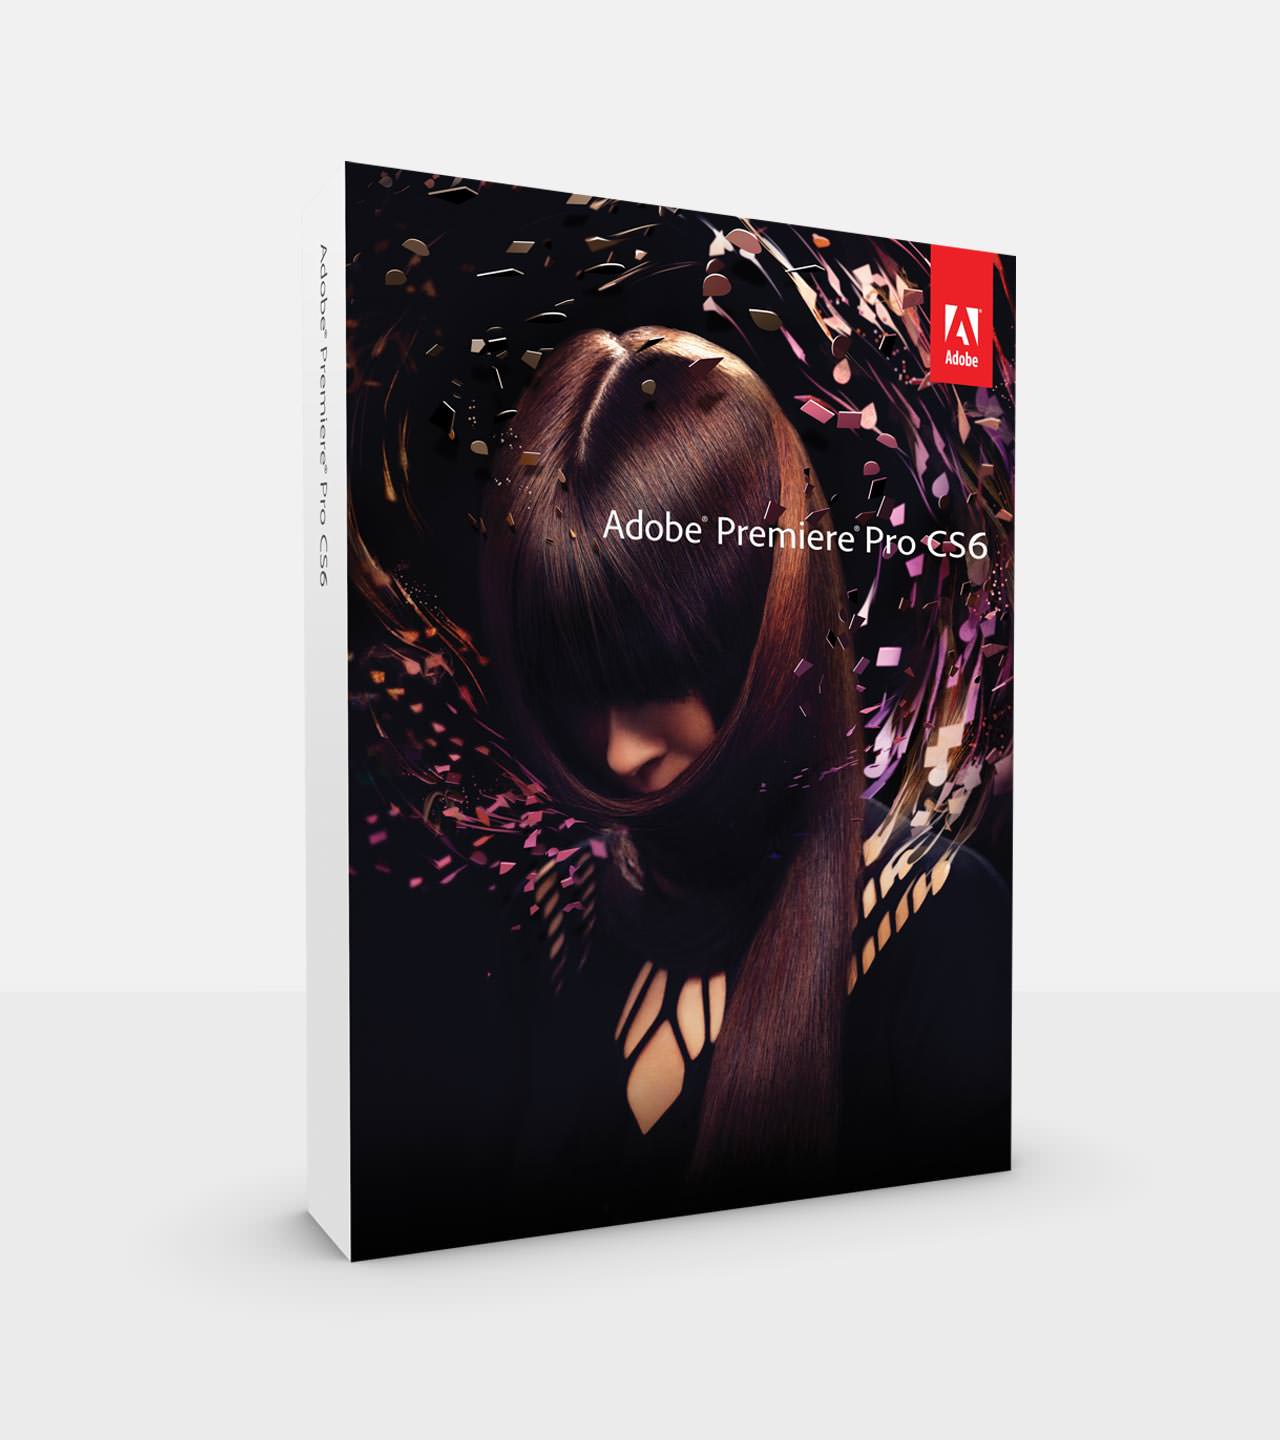 Adobe CS6 Premiere Pro Product Packaging